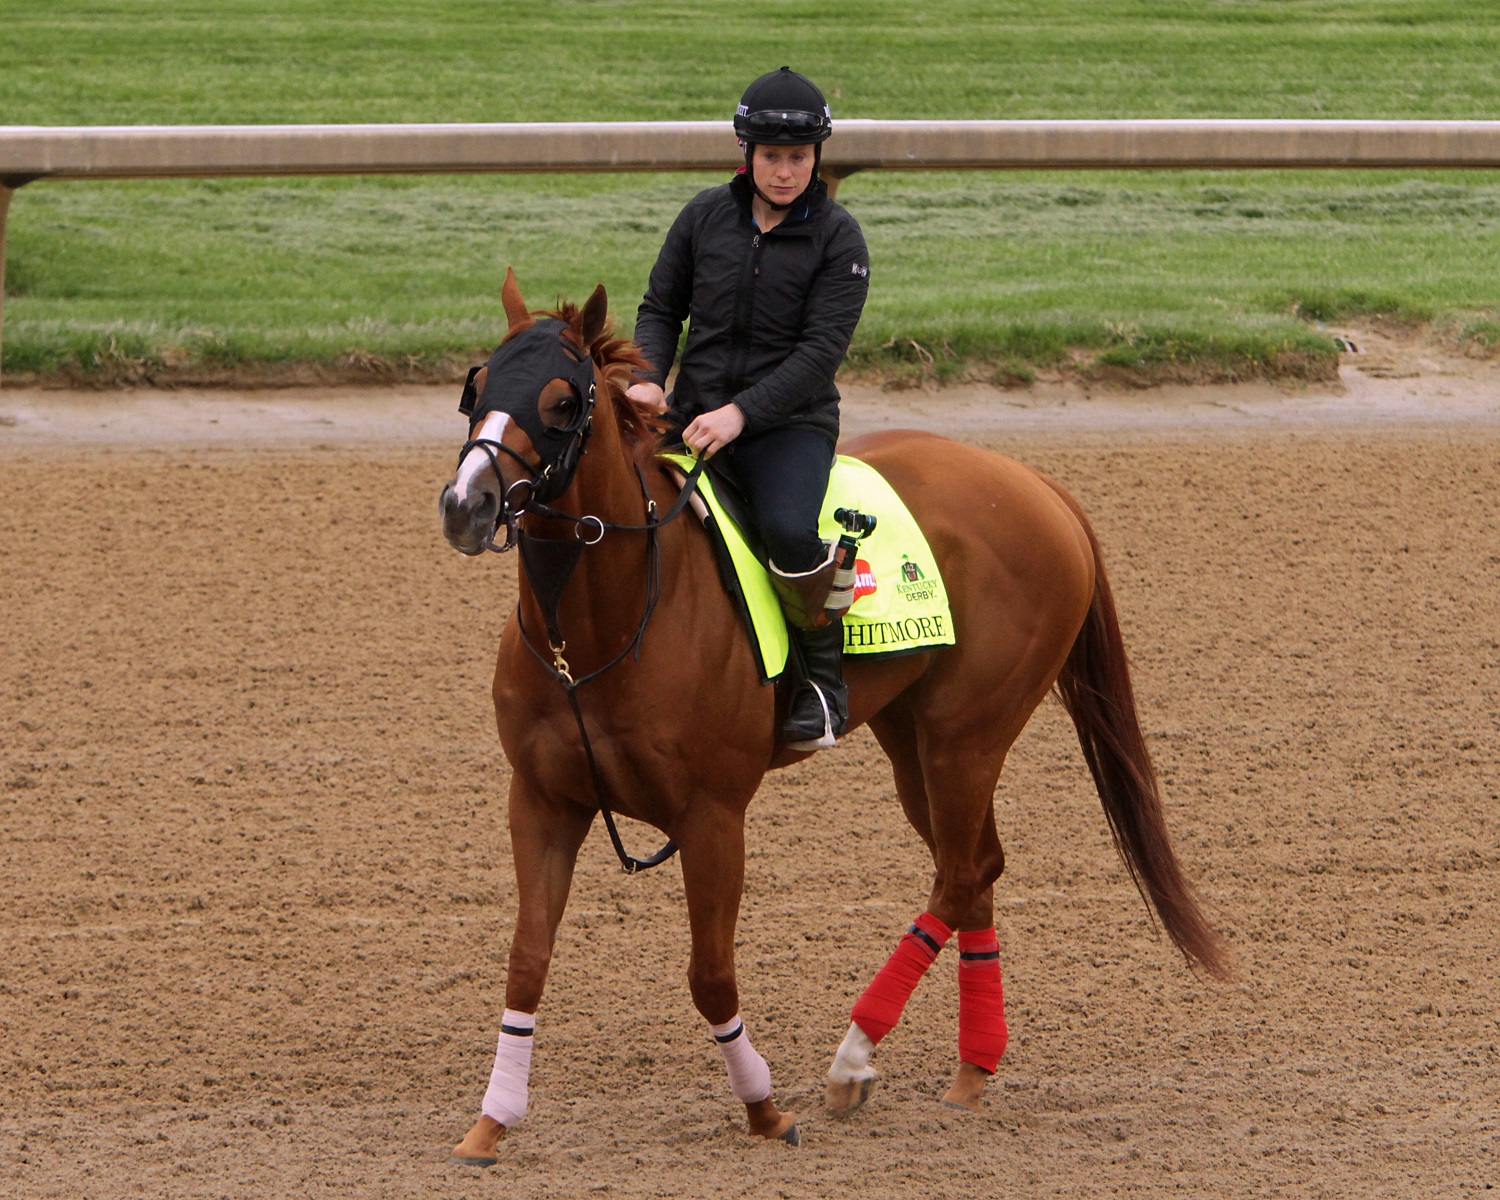 Kentucky Derby hopeful Whitmore, ridden by exercise rider Laura Moquett, is walked the wrong way on the track at Churchill Downs in Louisville, Ky., Tuesday, May 3, 2016. The 142nd Kentucky Derby is Saturday, May 7. (AP Photo/Garry Jones)